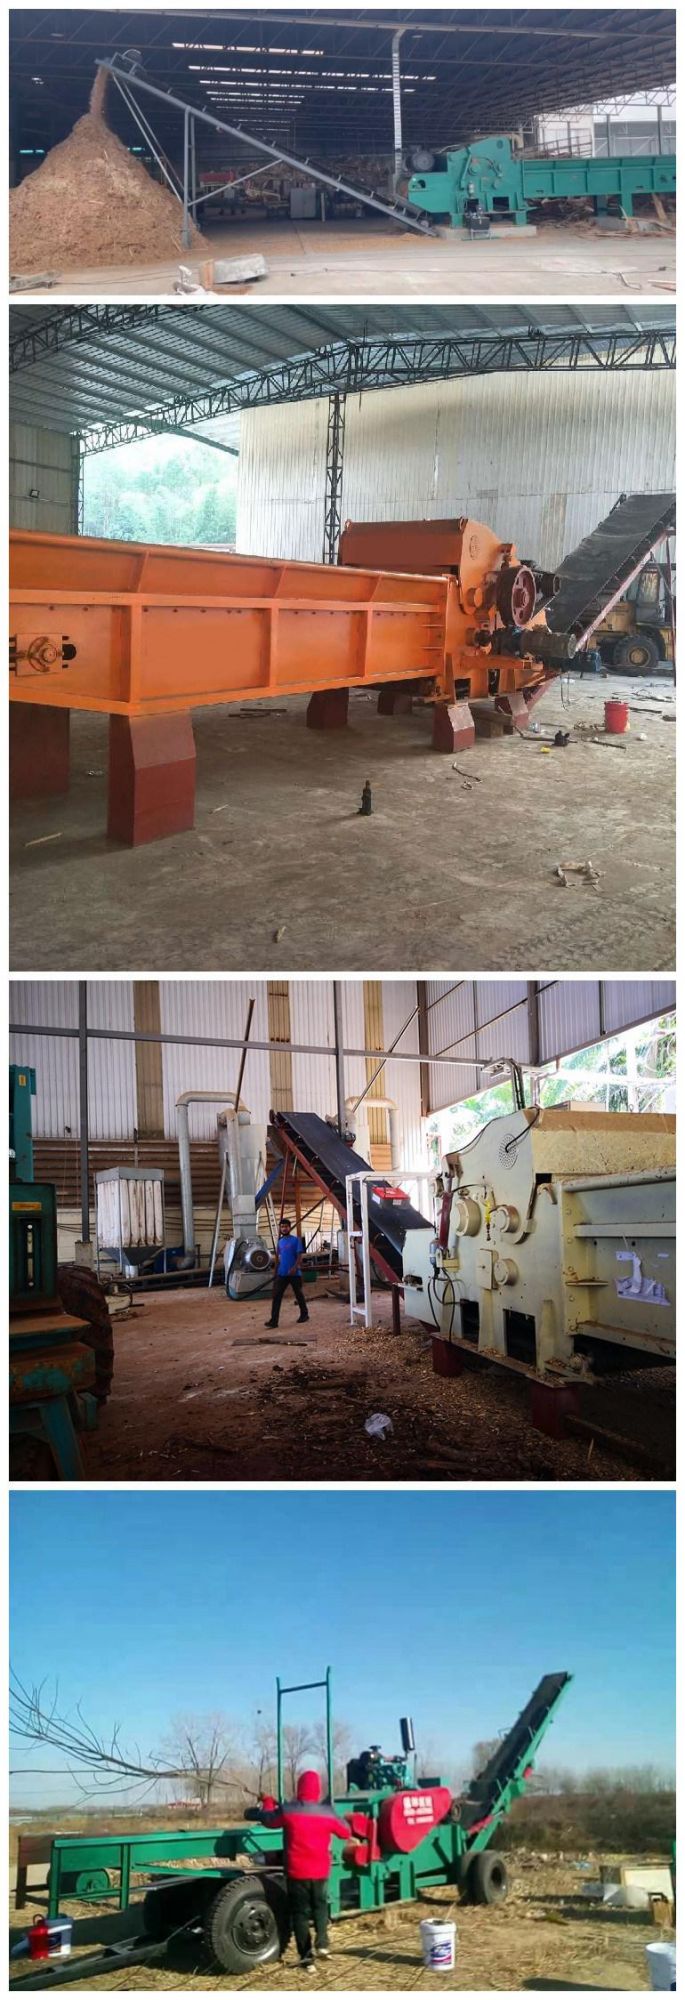 Shd Wholesale Price Wood Chipper Shredder for Agricultural Machinery and Equipment